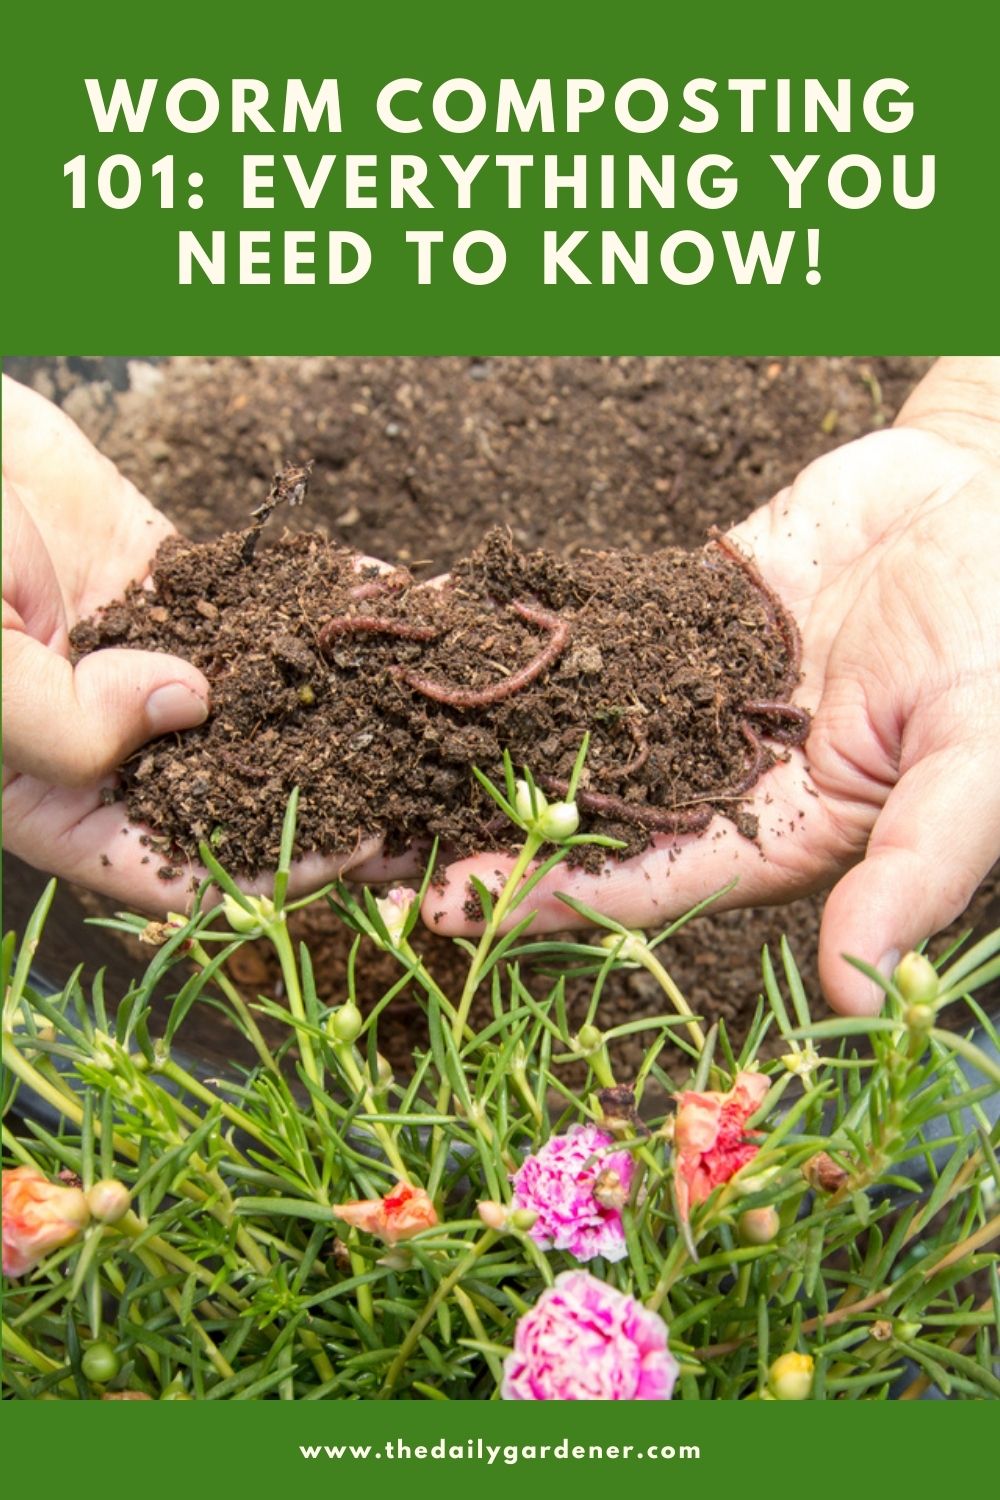 Worm Composting 101 Everything You Need to Know! 2